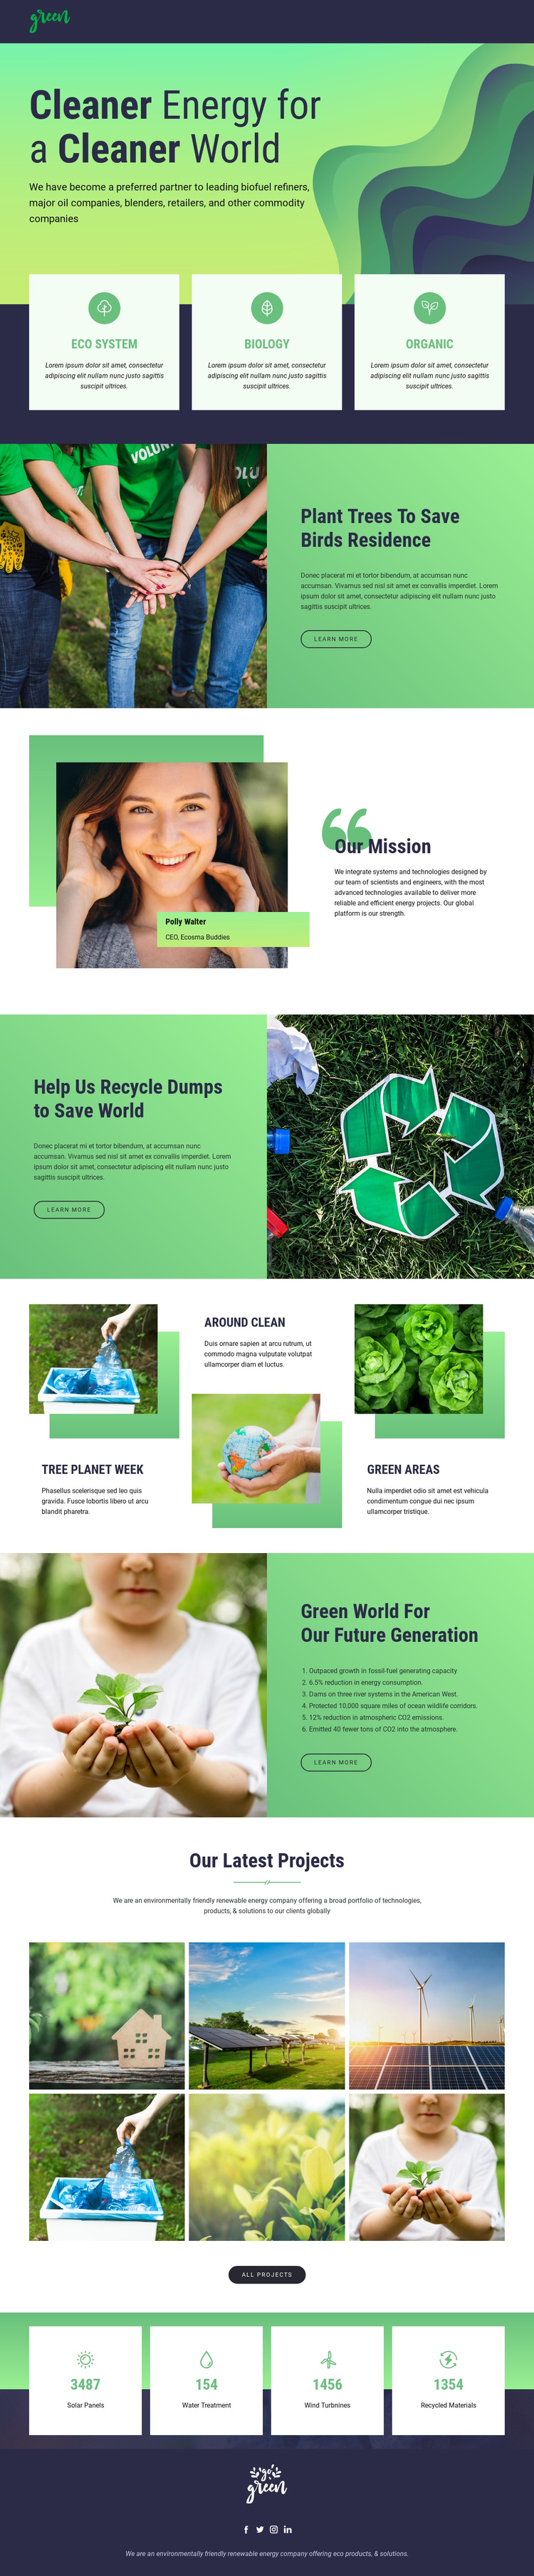 Clean energy to save nature Joomla Page Builder